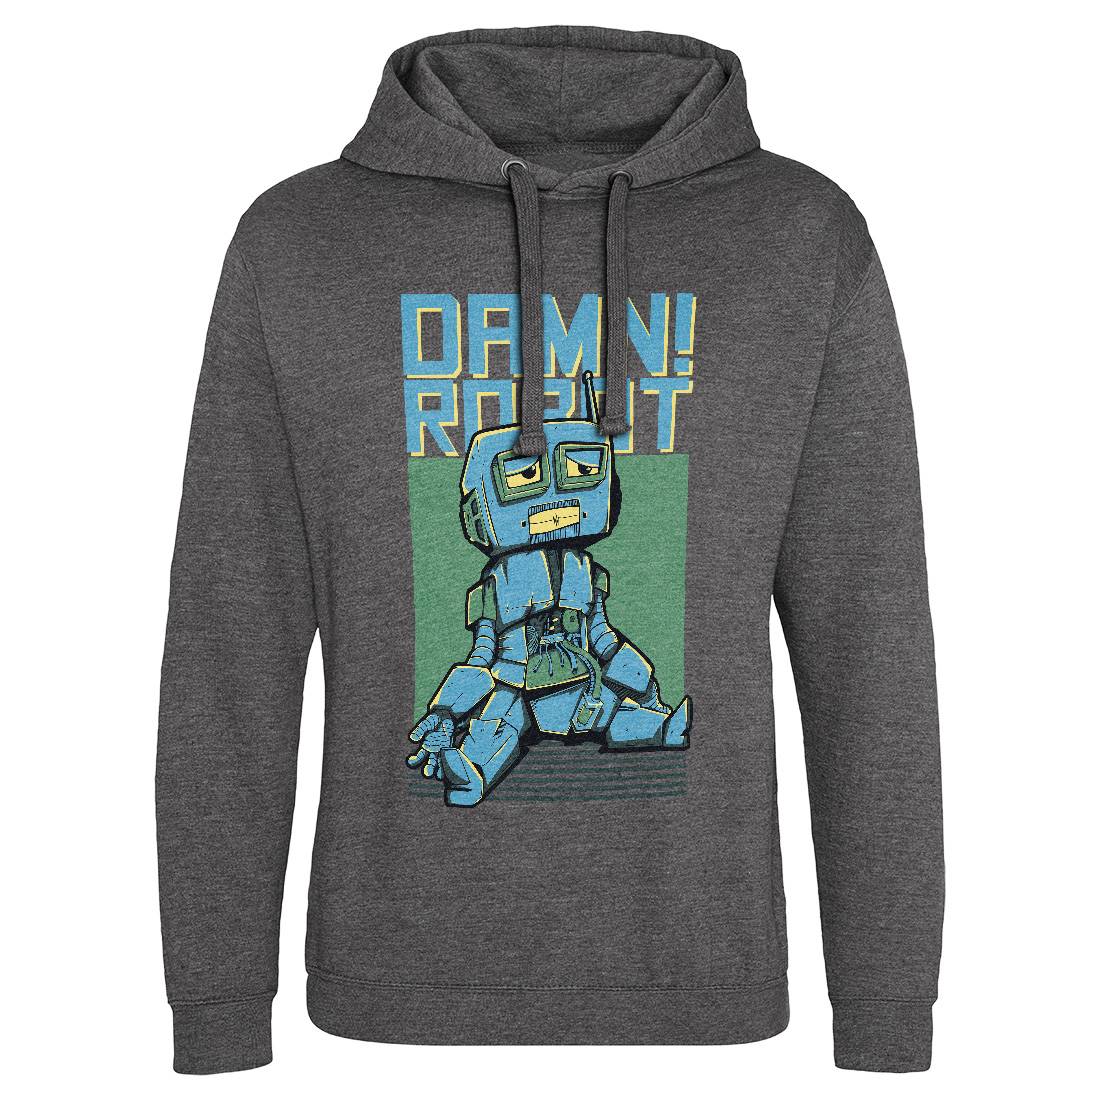 Damn Robot Mens Hoodie Without Pocket Space D743